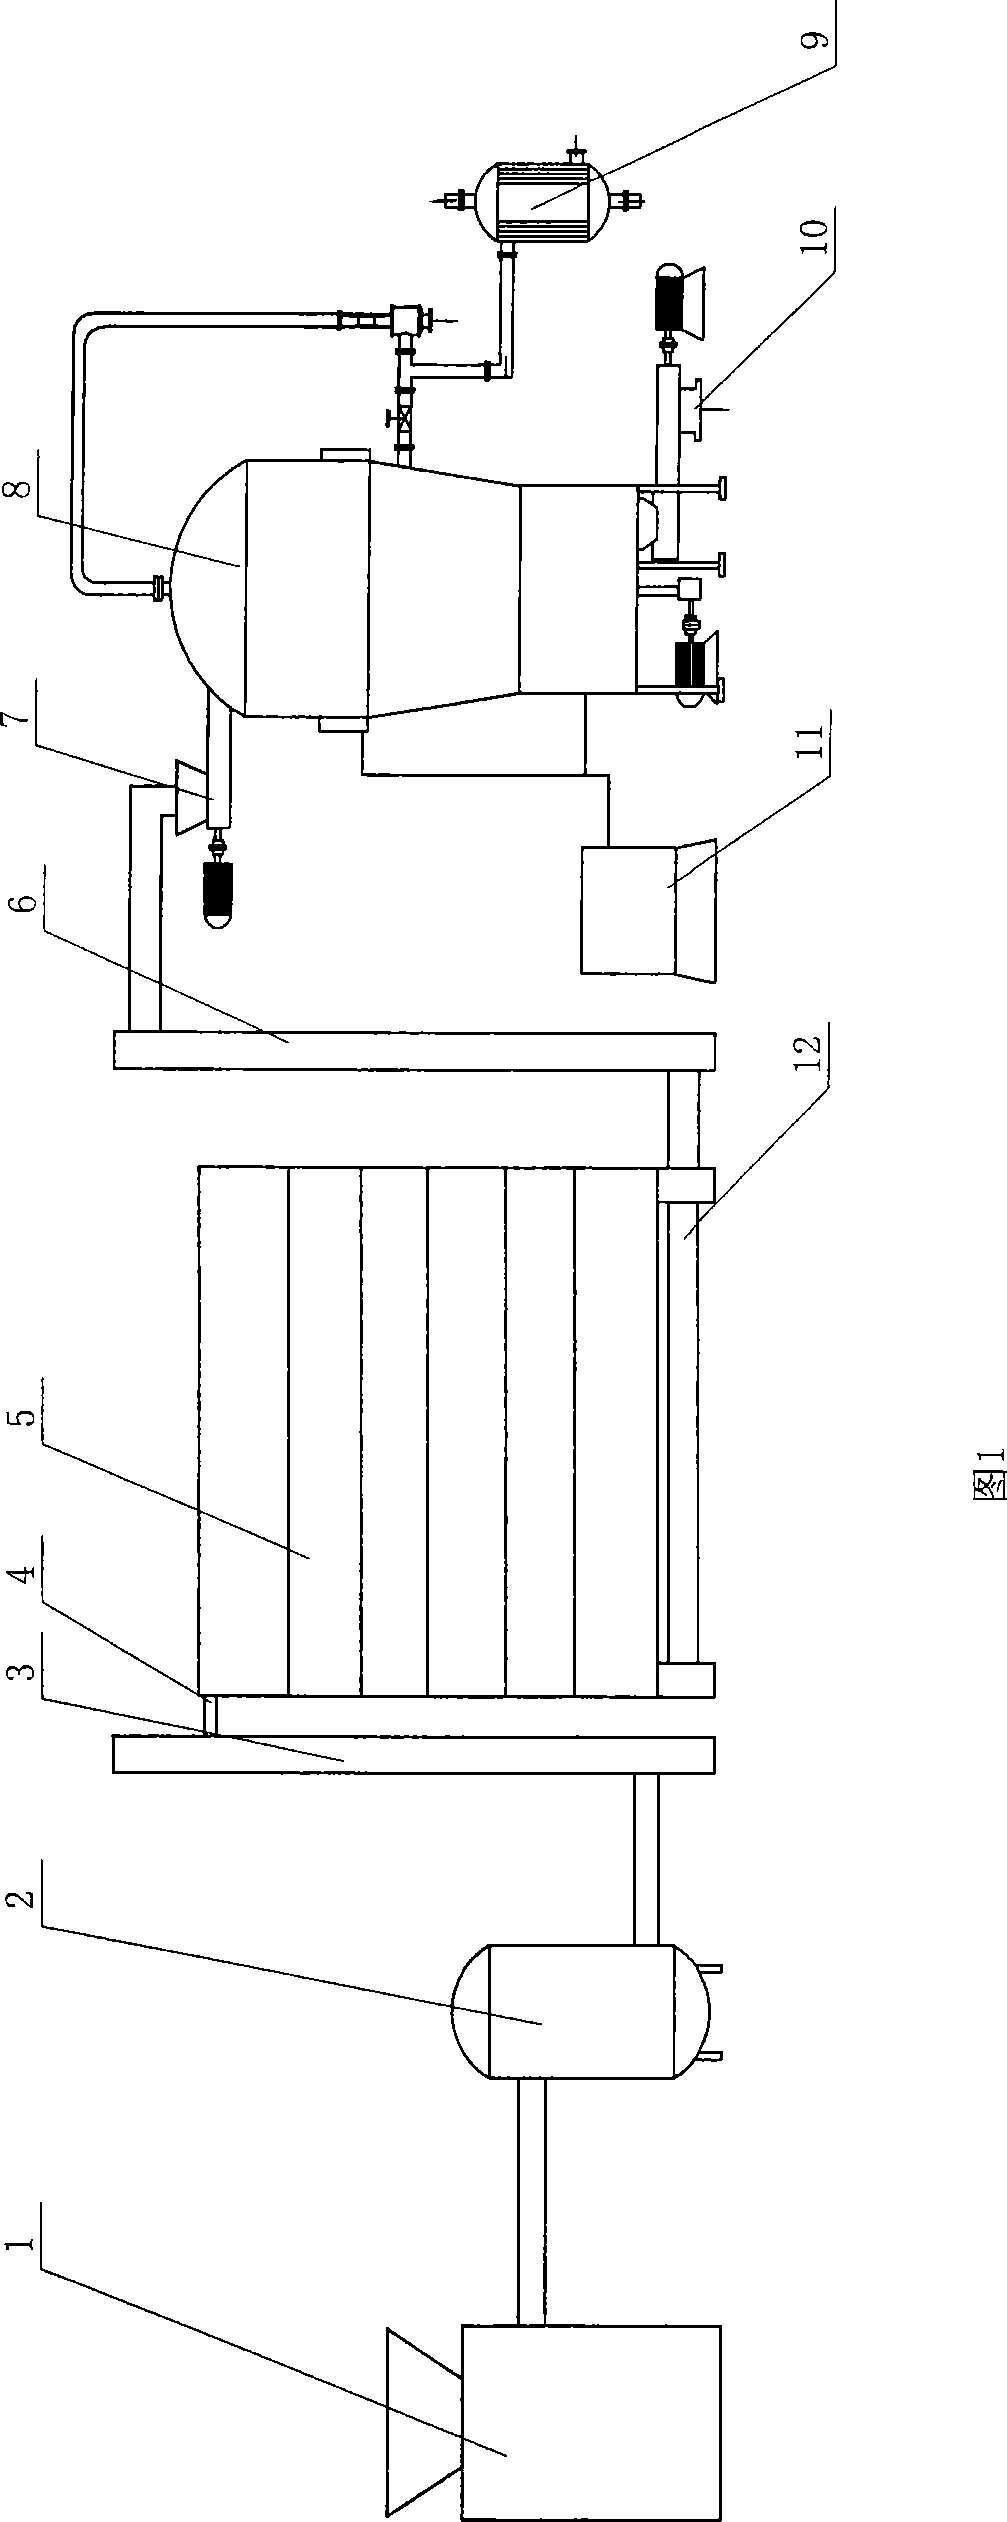 Process and system for producing ethanol through solid-state continuous fermentation and distillation of sorgo straws